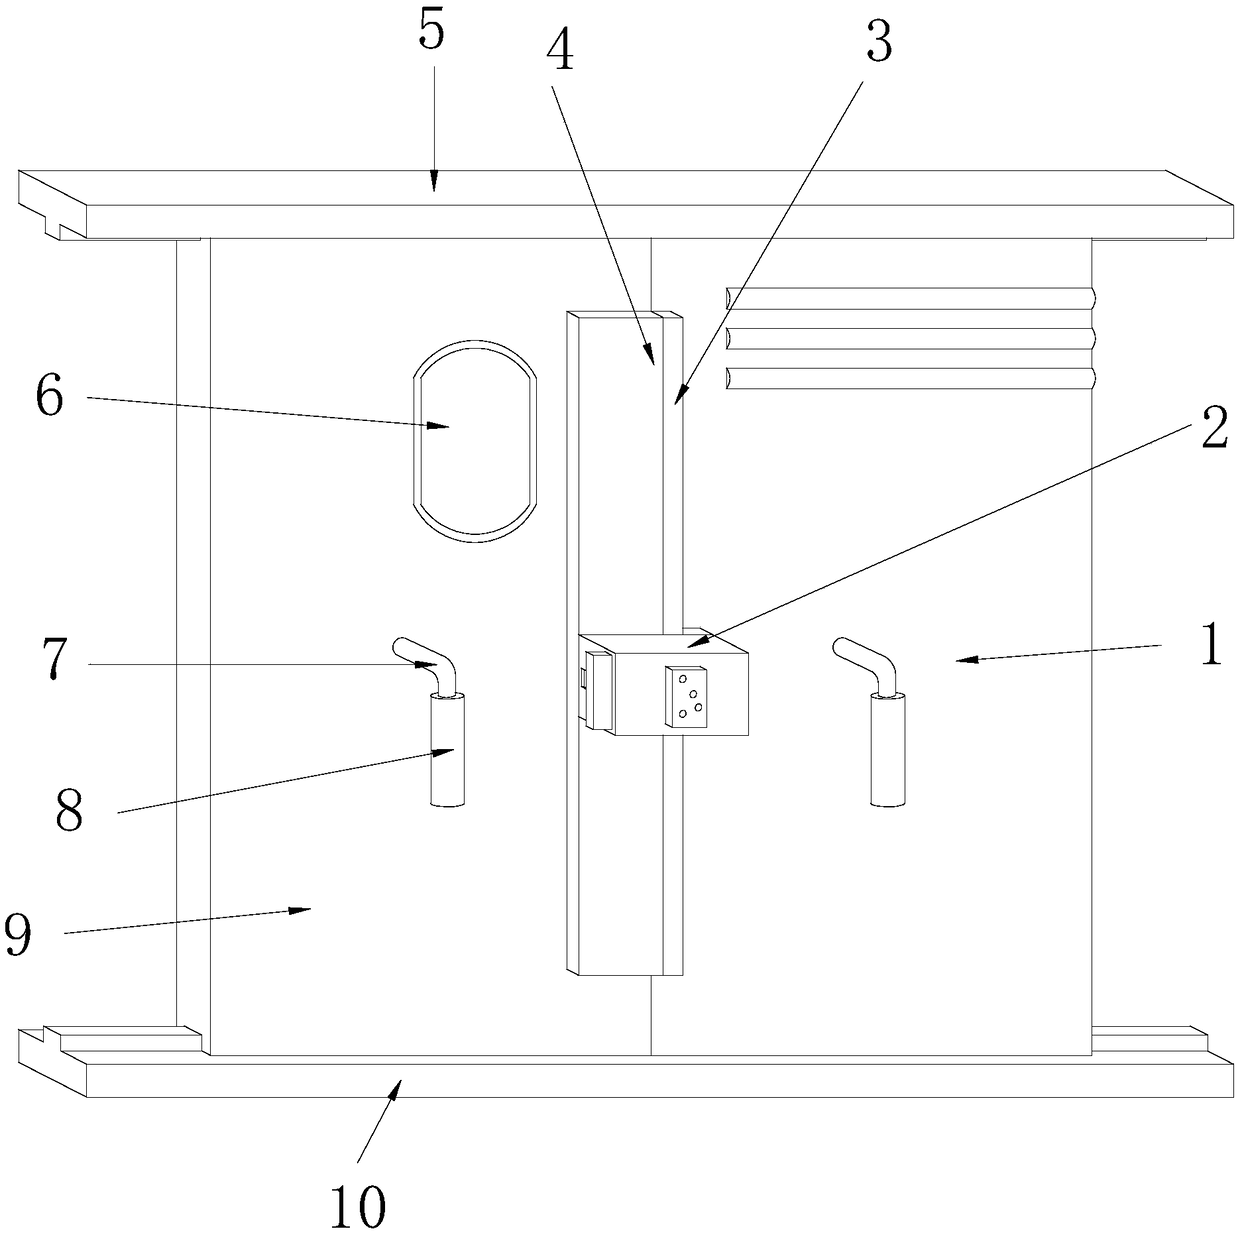 Novel sealing device for side doors of wagon